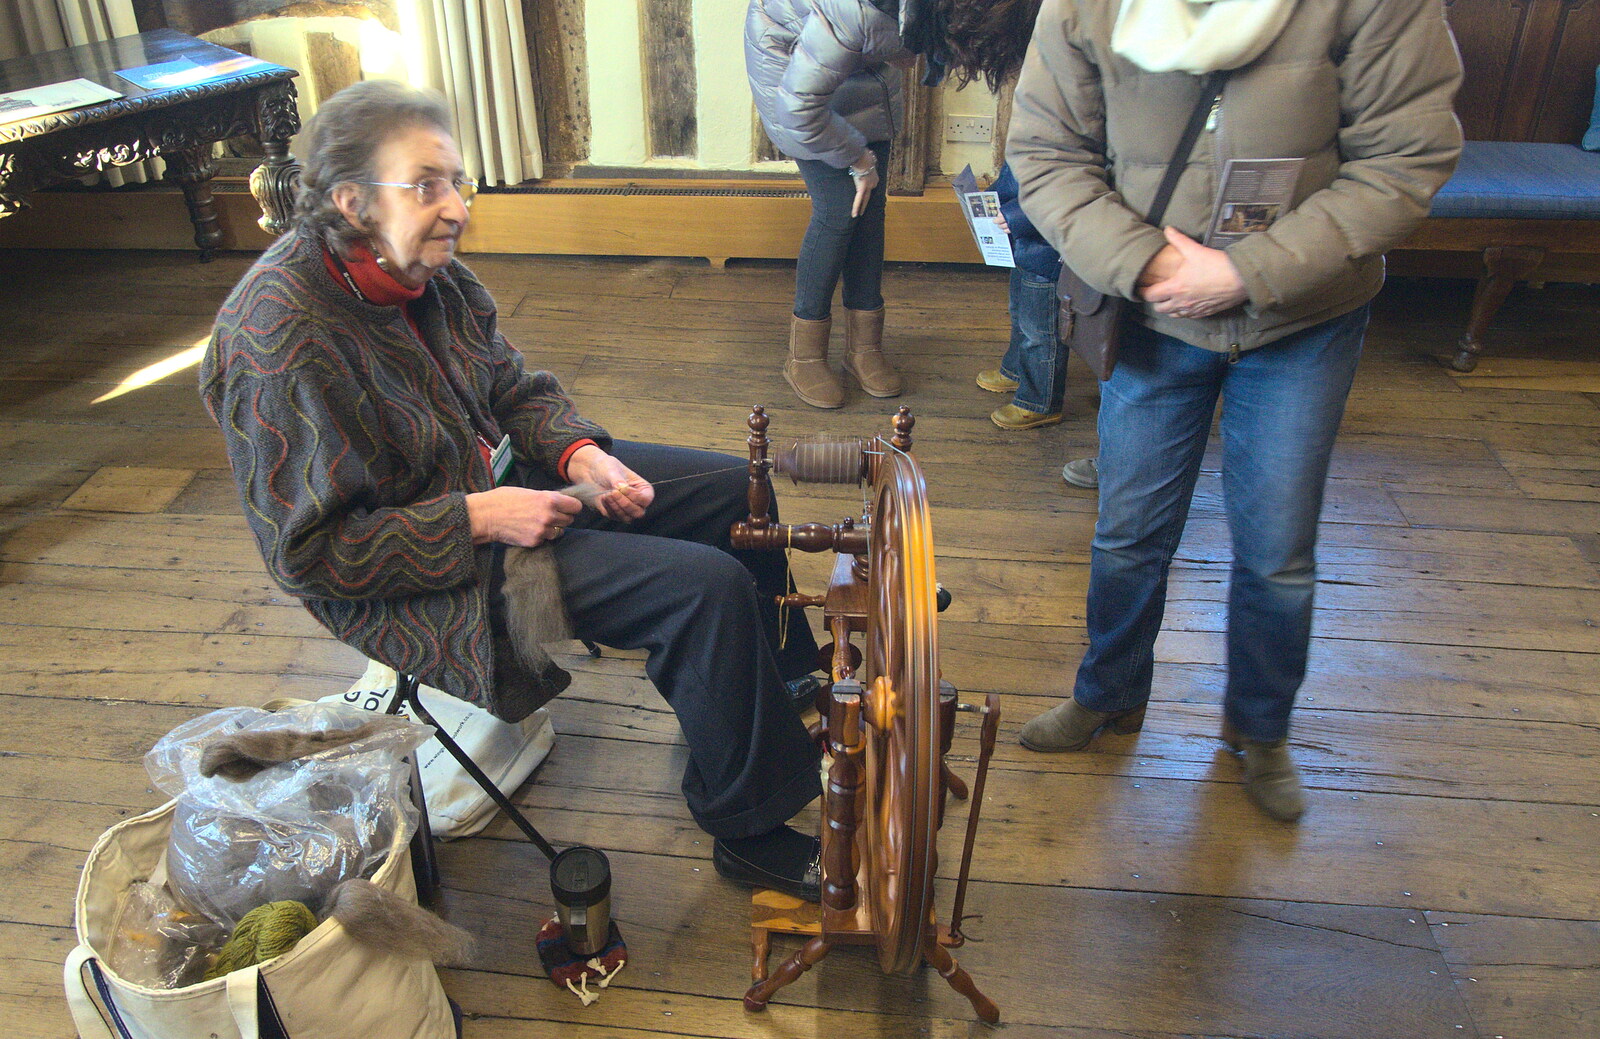 There's a spinning demonstration occuring from A Day in Lavenham, Suffolk - 22nd January 2017